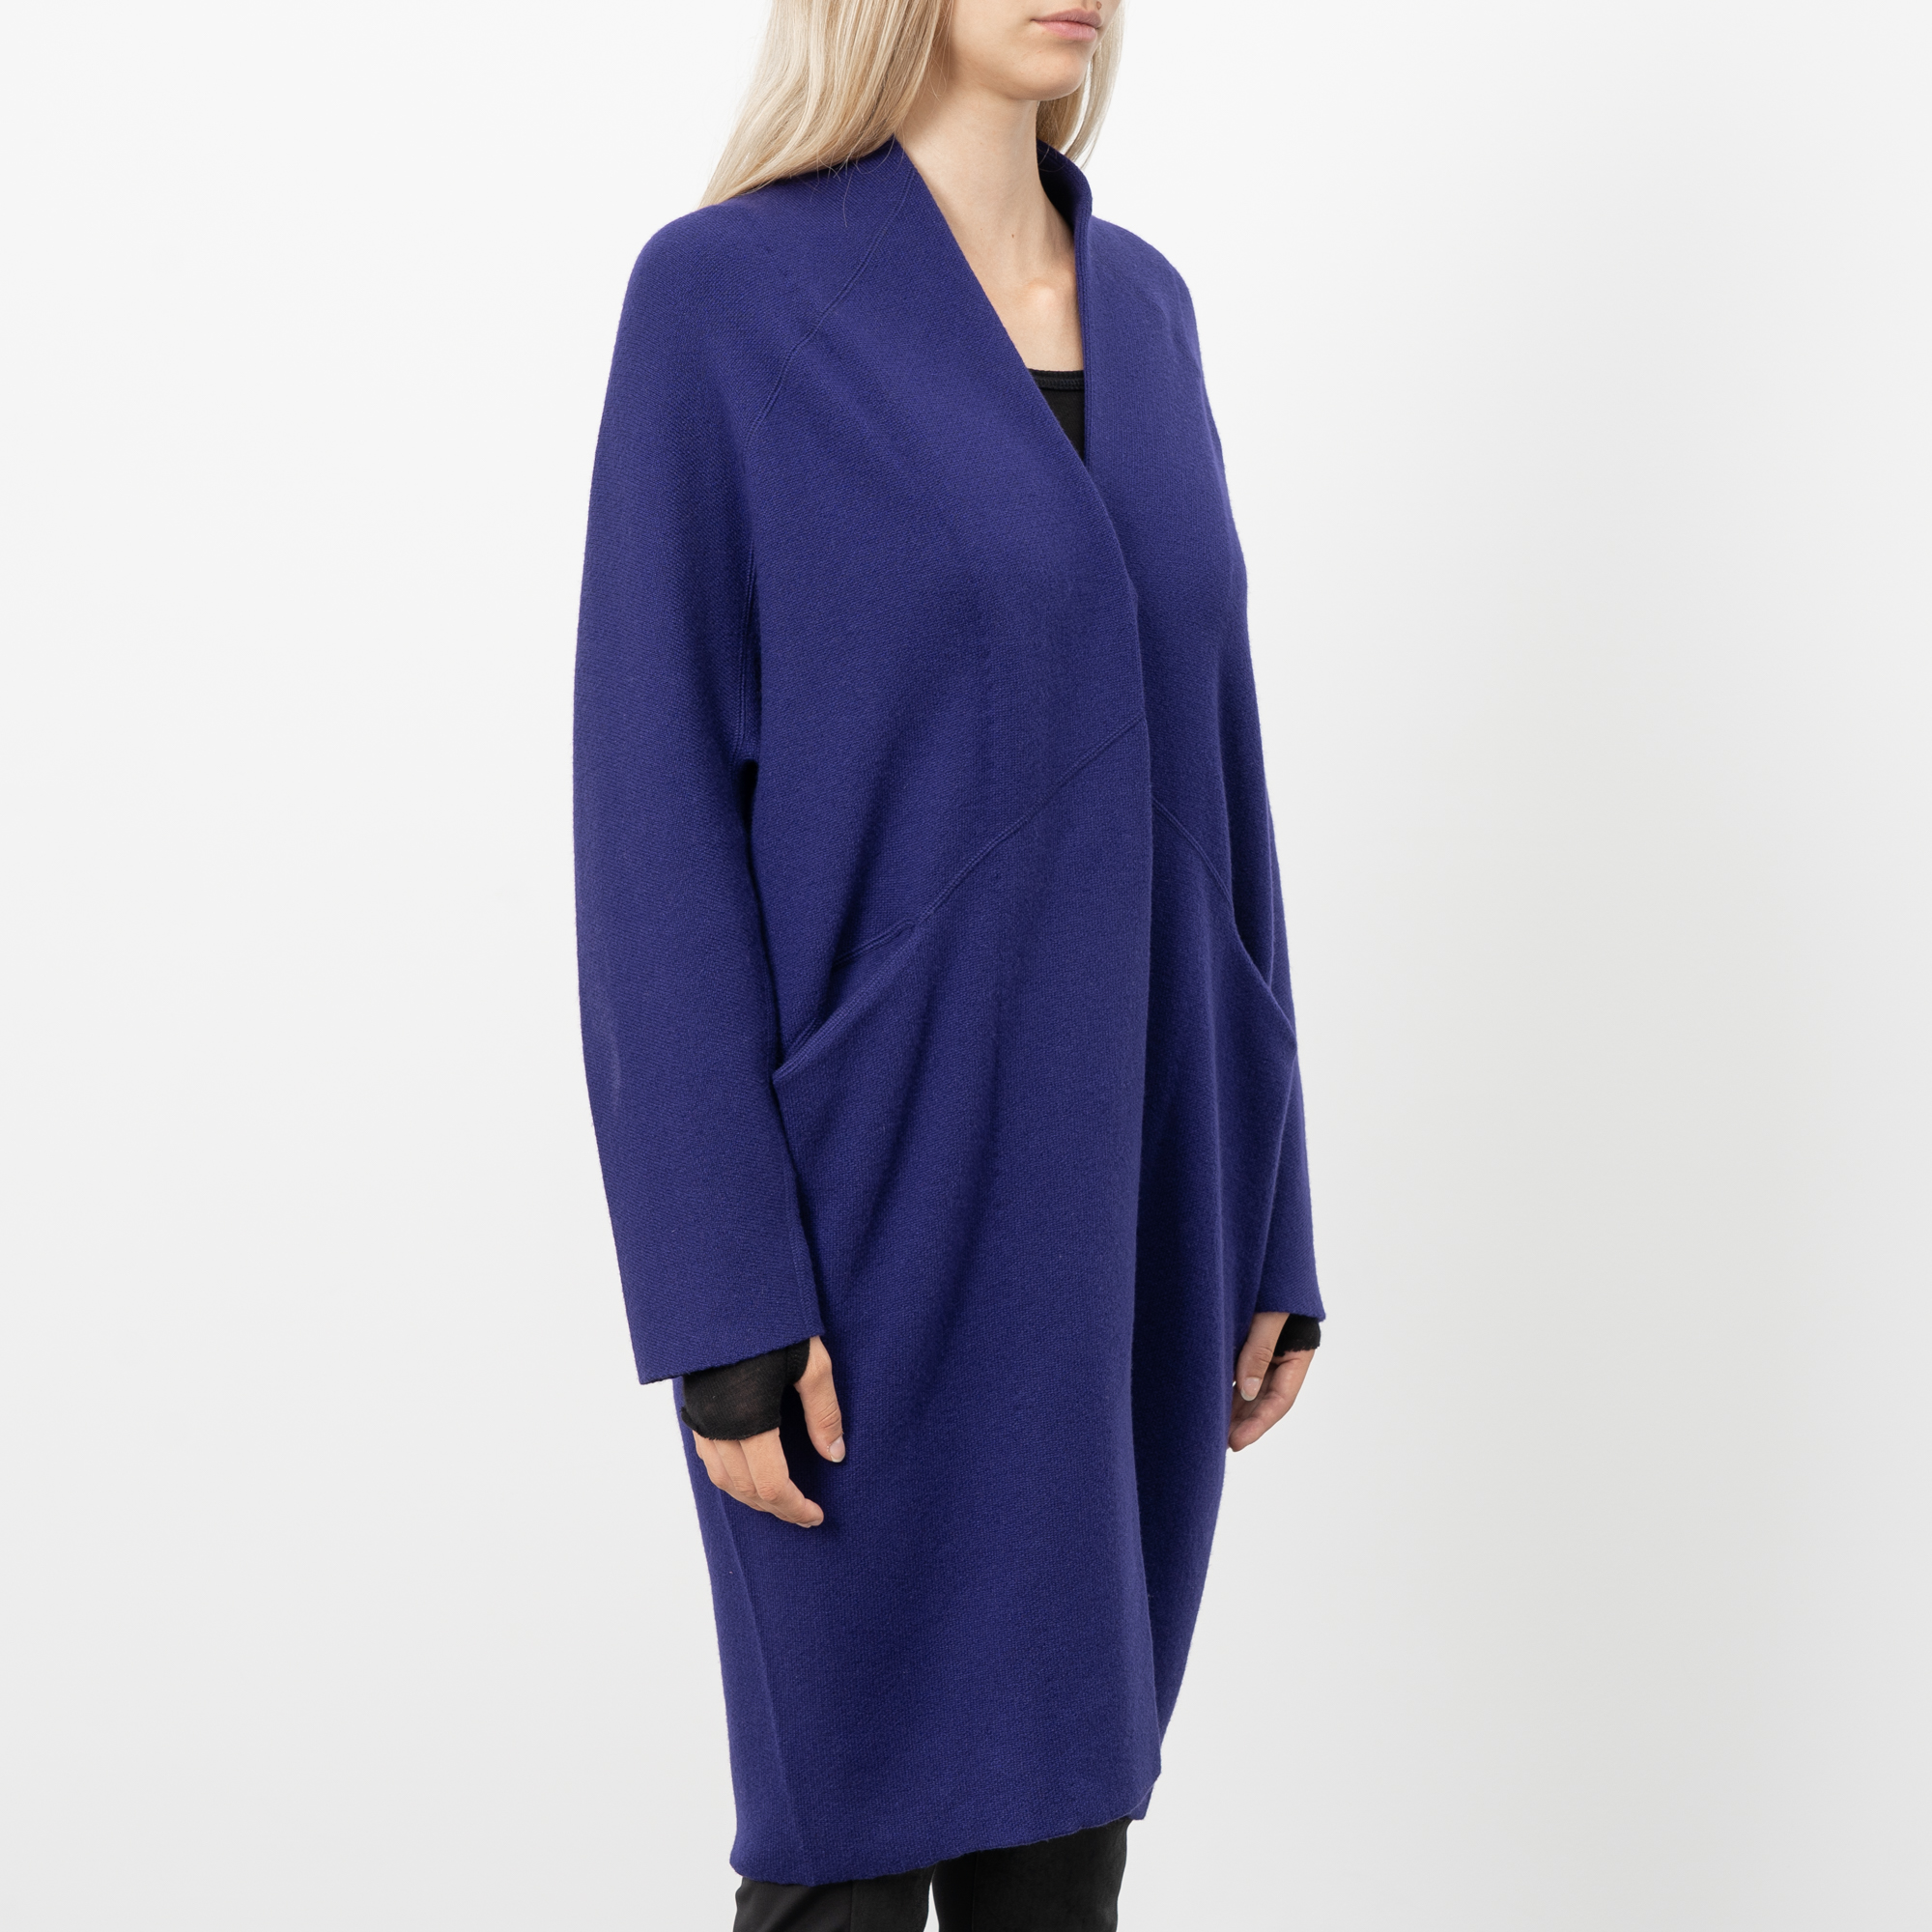 PURPLE KNITTED CASHMERE COAT|wolfensson